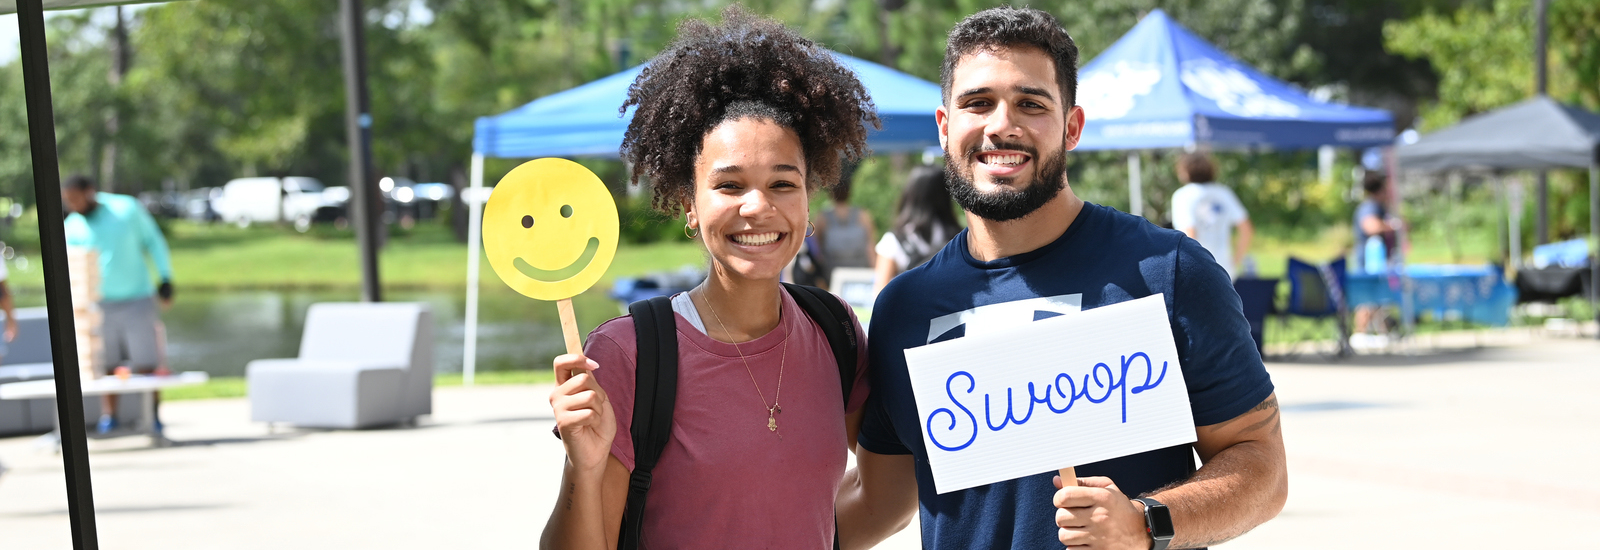 Male and female student holding a smiling face sign and a swoop sign, both smiling